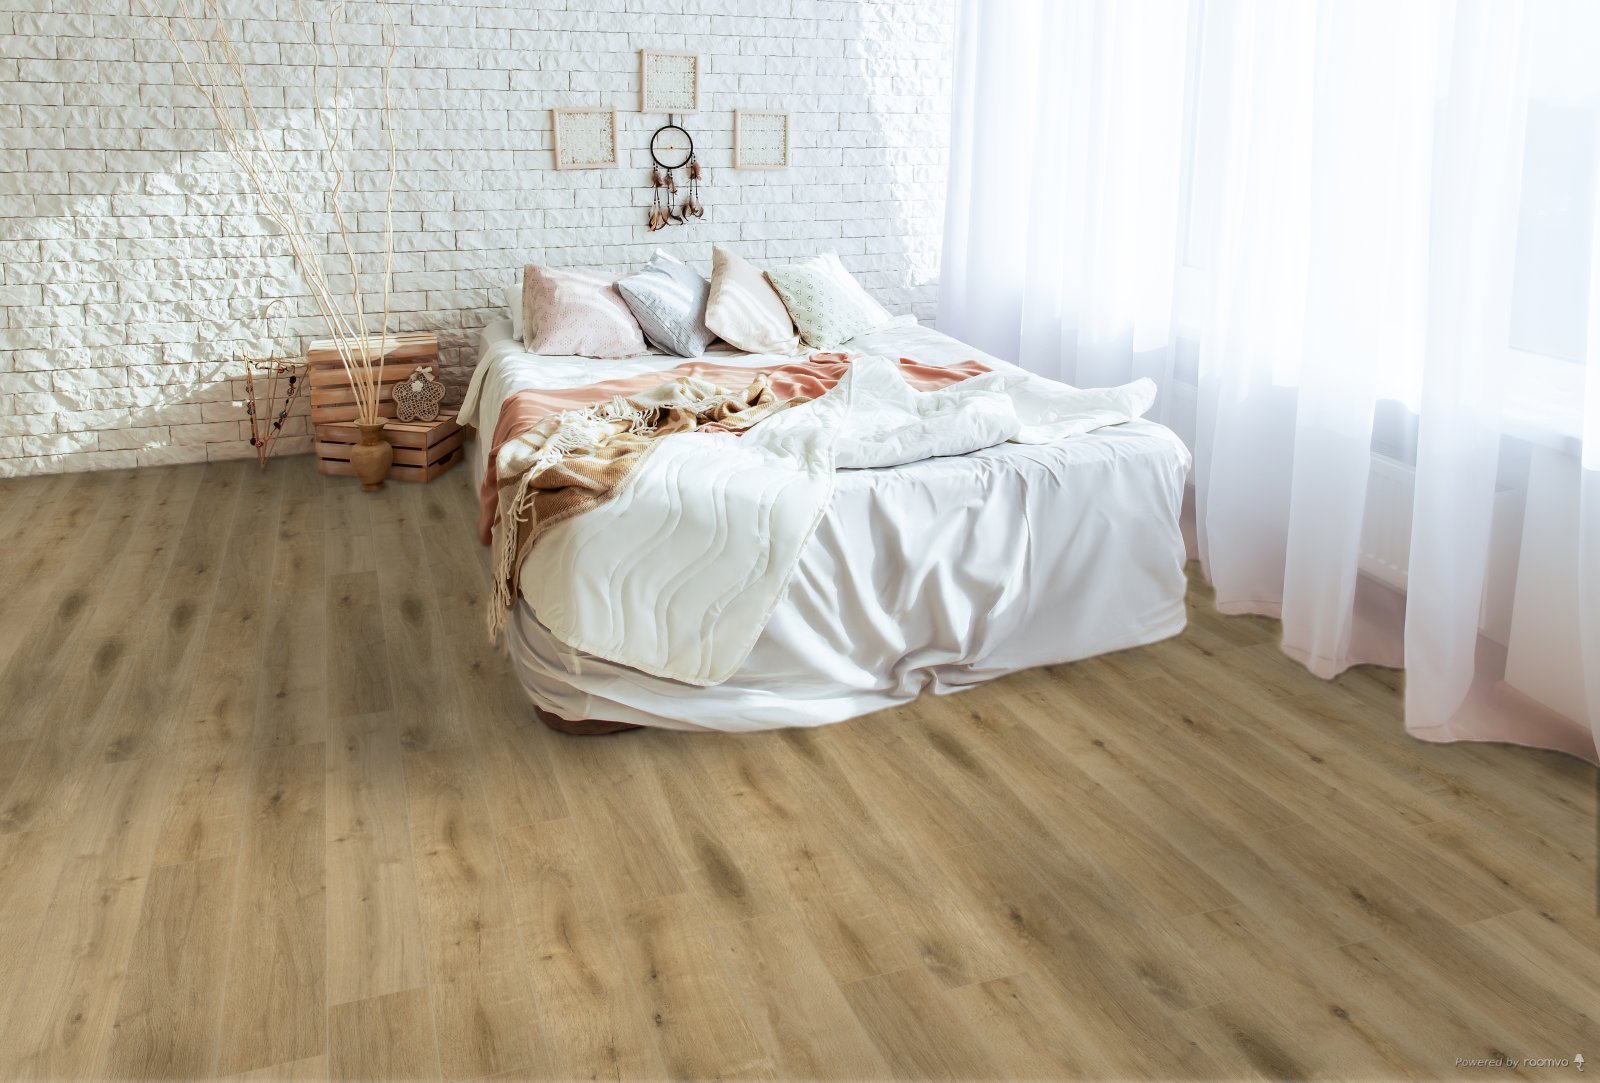 Horizen Flooring presents to you a picture of a quality wide plank Hood River luxury vinyl plank. NovoCore Q Merengue collection features a wide range of colors & designs that will compliment any interior. Natural wood grain synchronized surface allow for an authentic hardwood look & feel. This collection features a 0.3″ / 7.5 mm overall thickness and a durable 22 mil / 0.55 mm wear layer for residential and commercial applications.